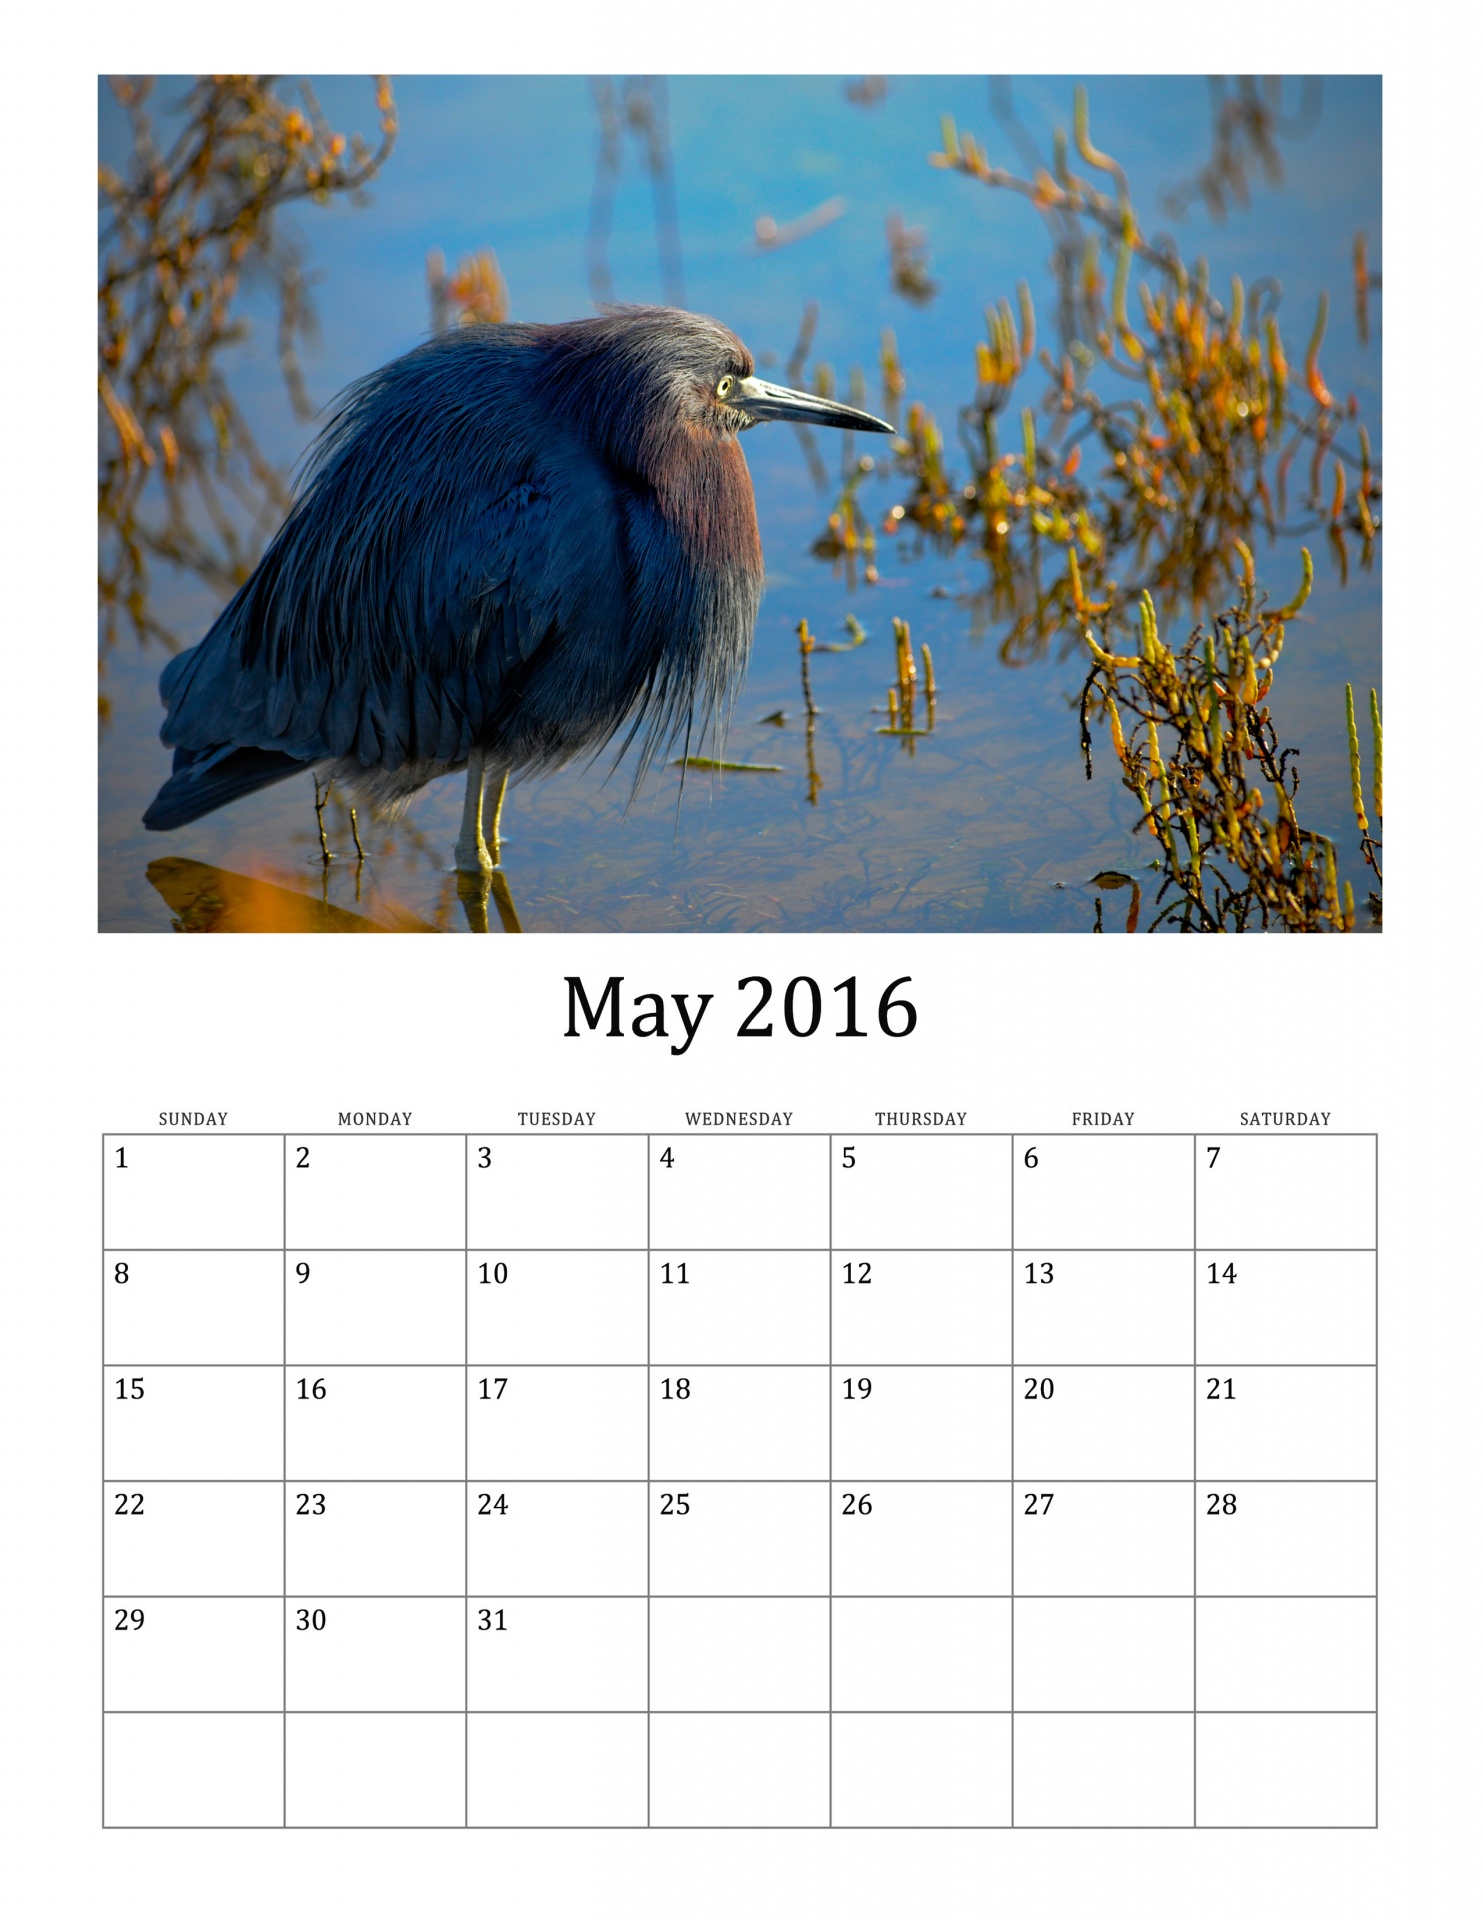 may-2016-calendar-of-wild-birds-free-stock-photo-public-domain-pictures